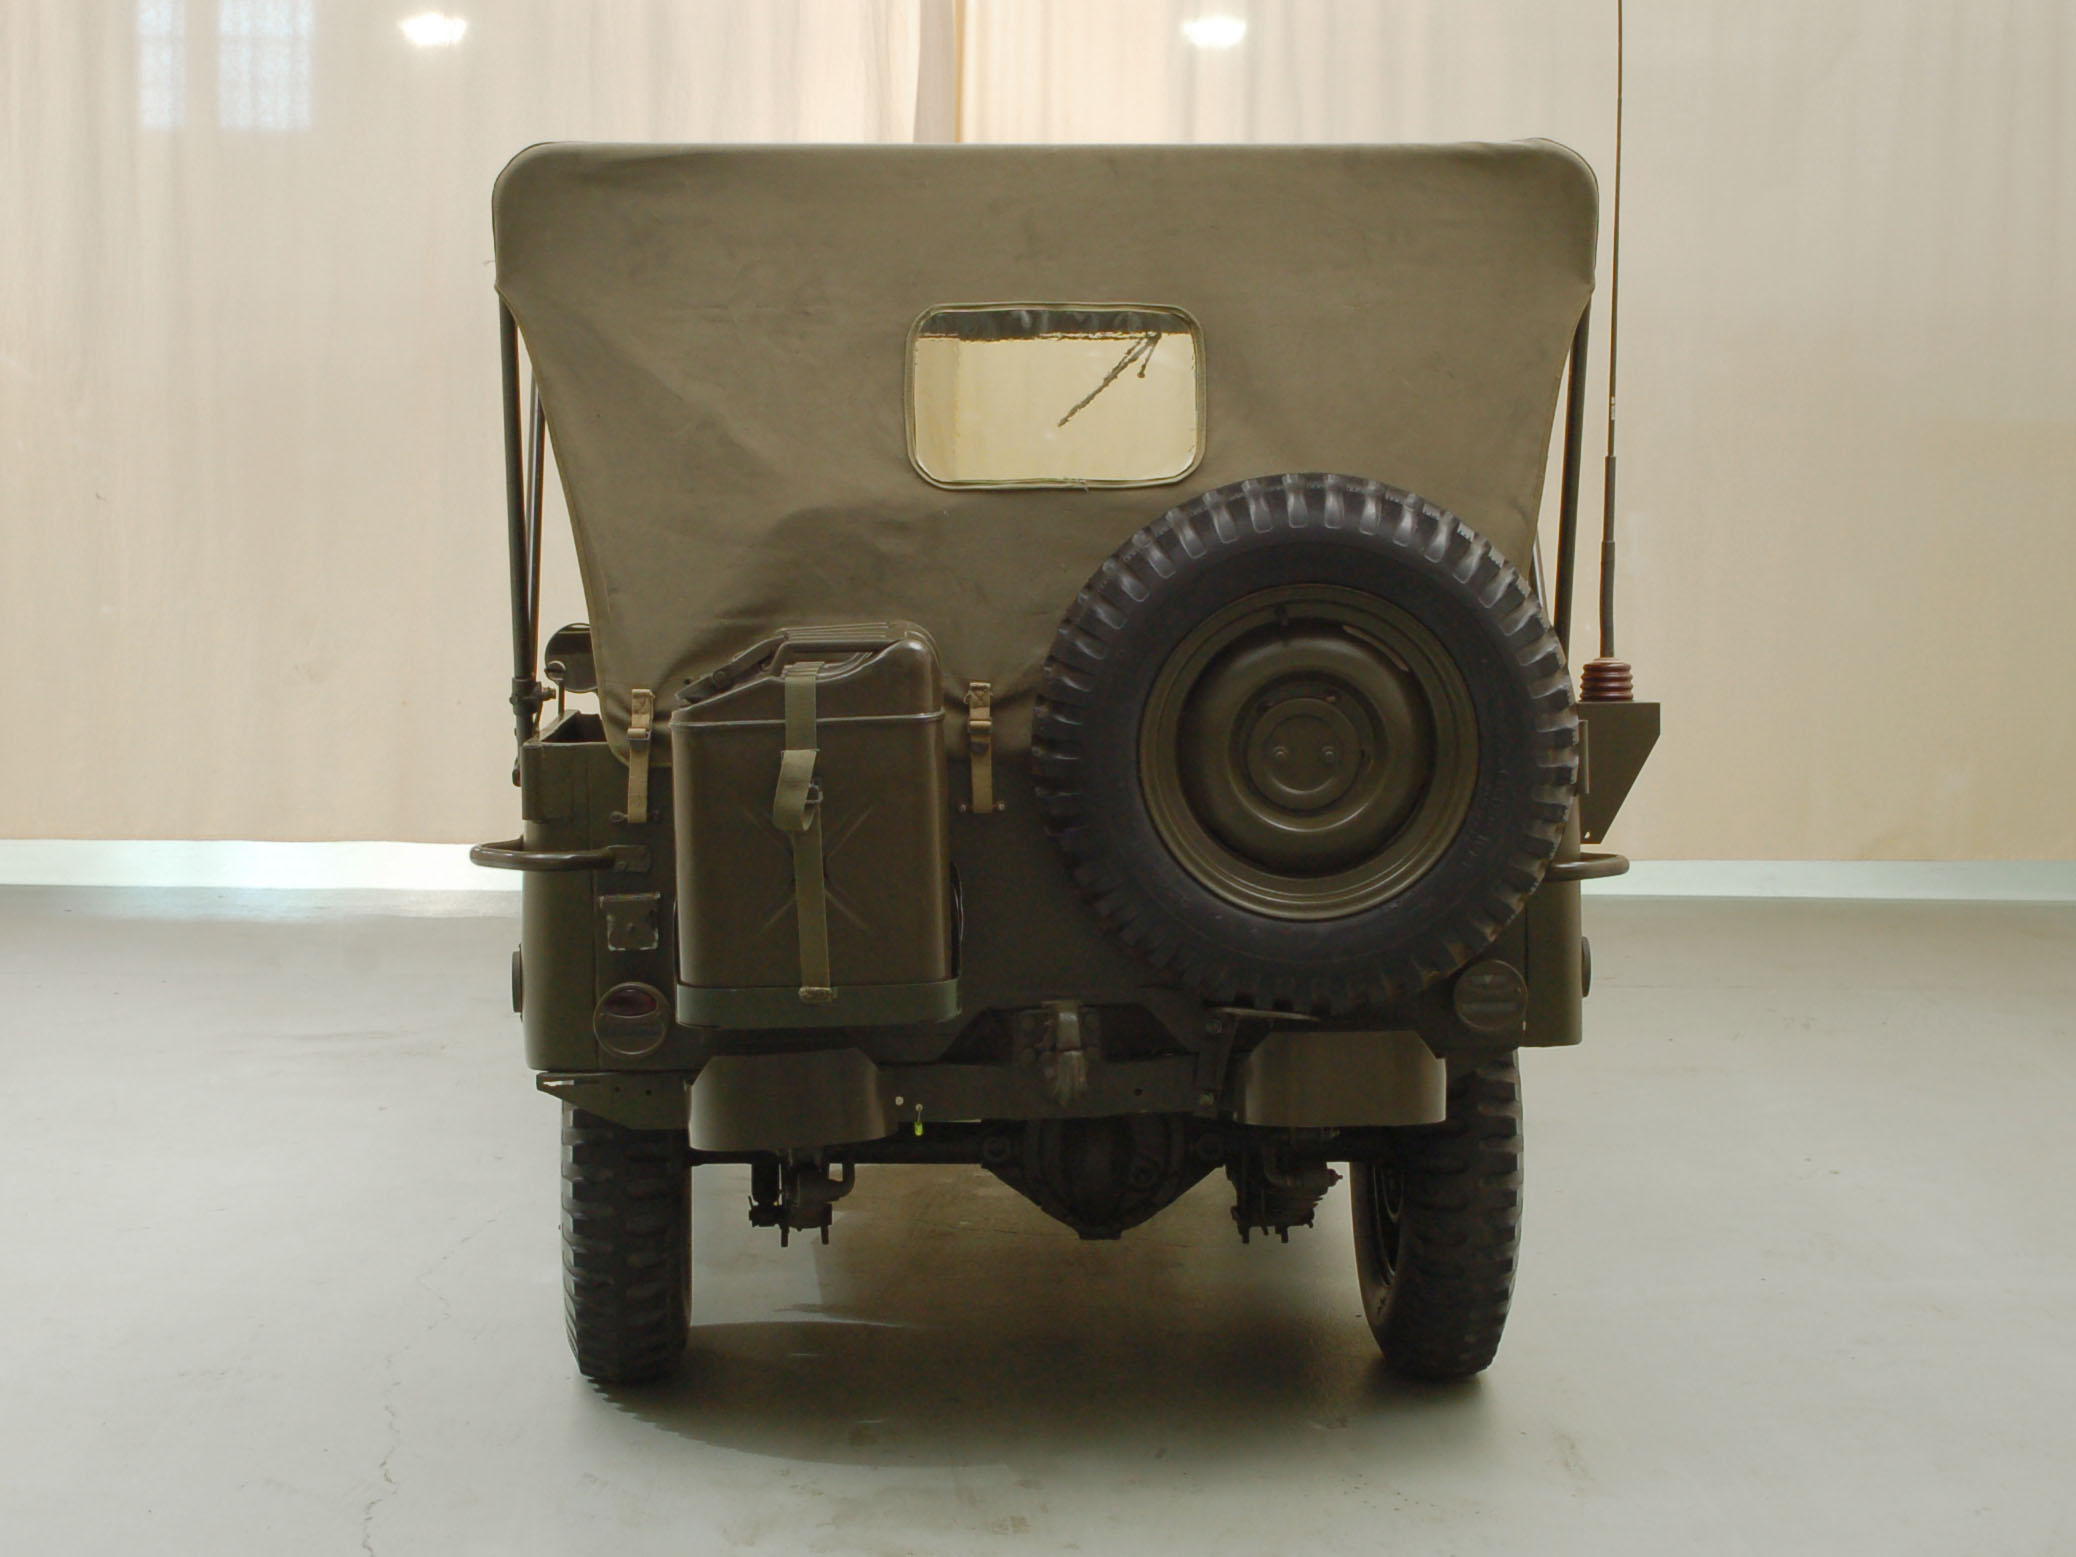 1942 willys-overland mb (jeep) 1/4 ton